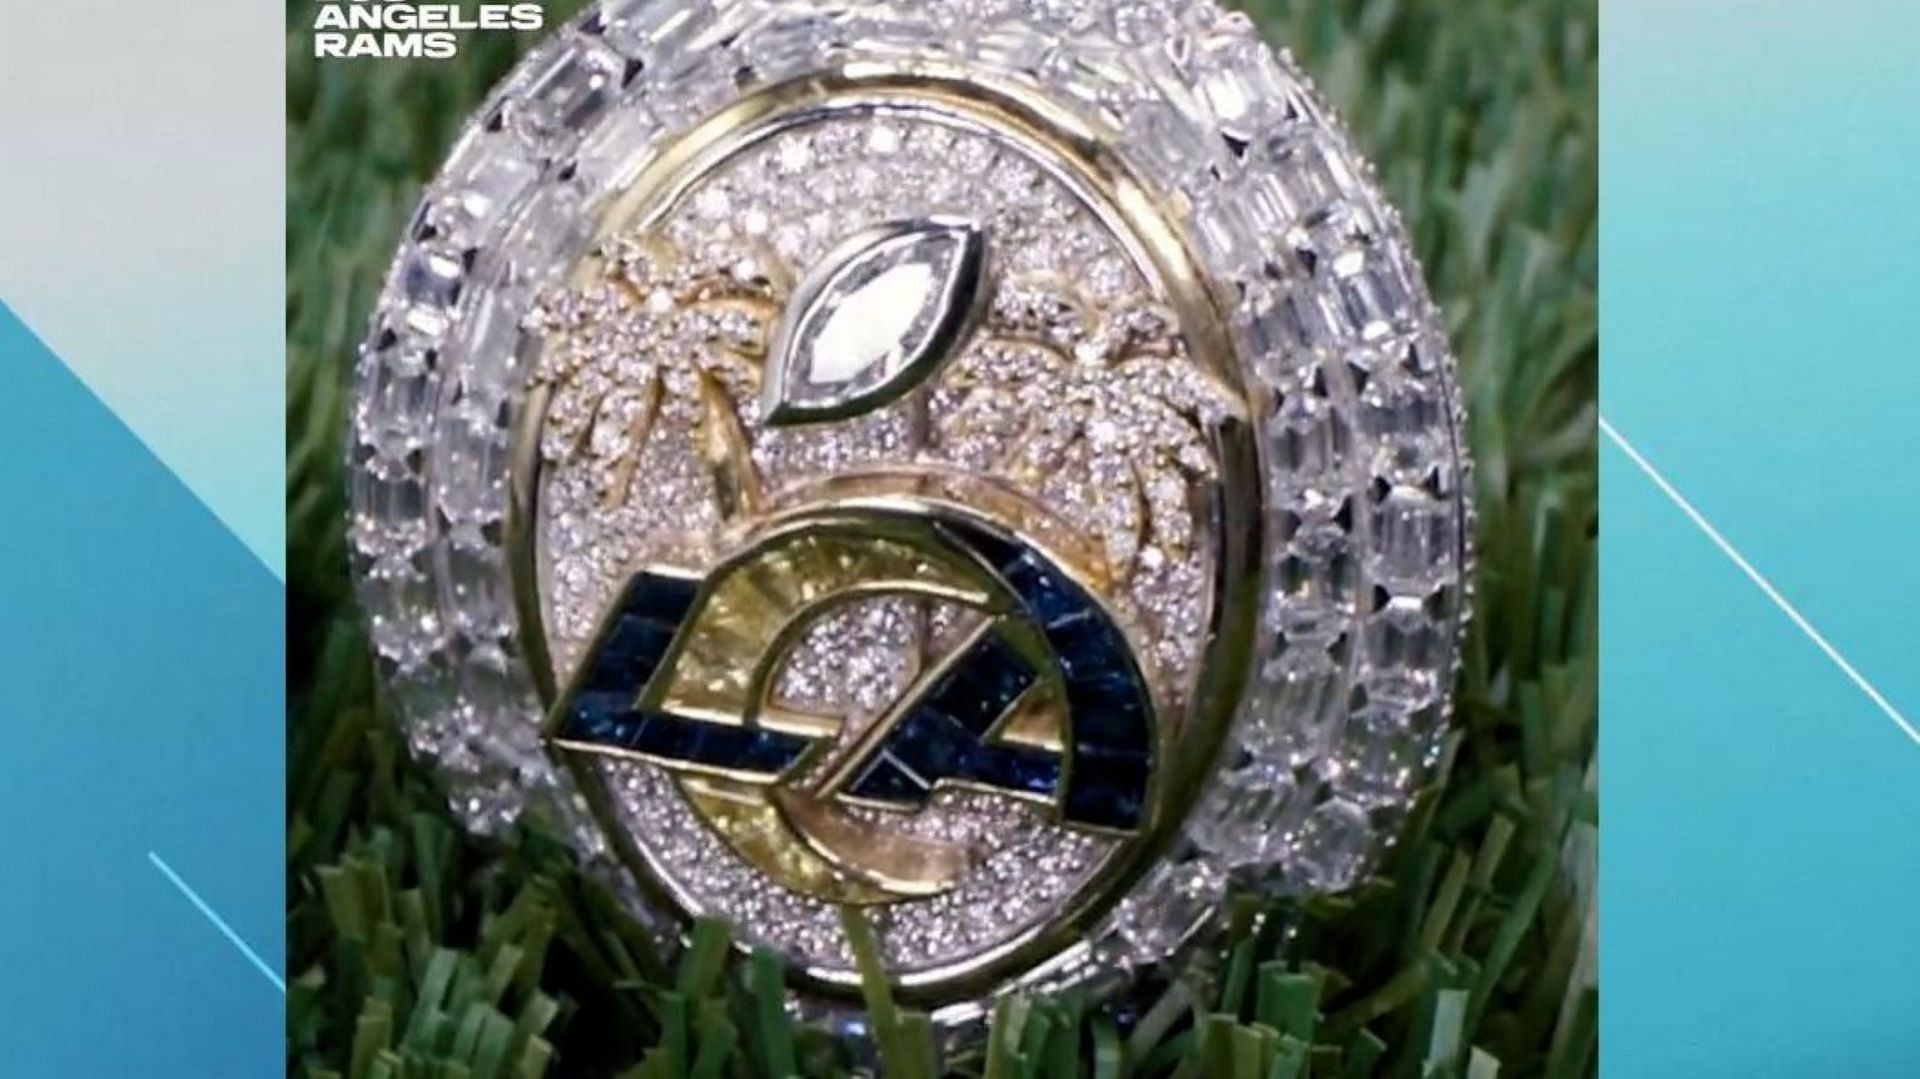 Florio blasts Rams over Super Bowl rings